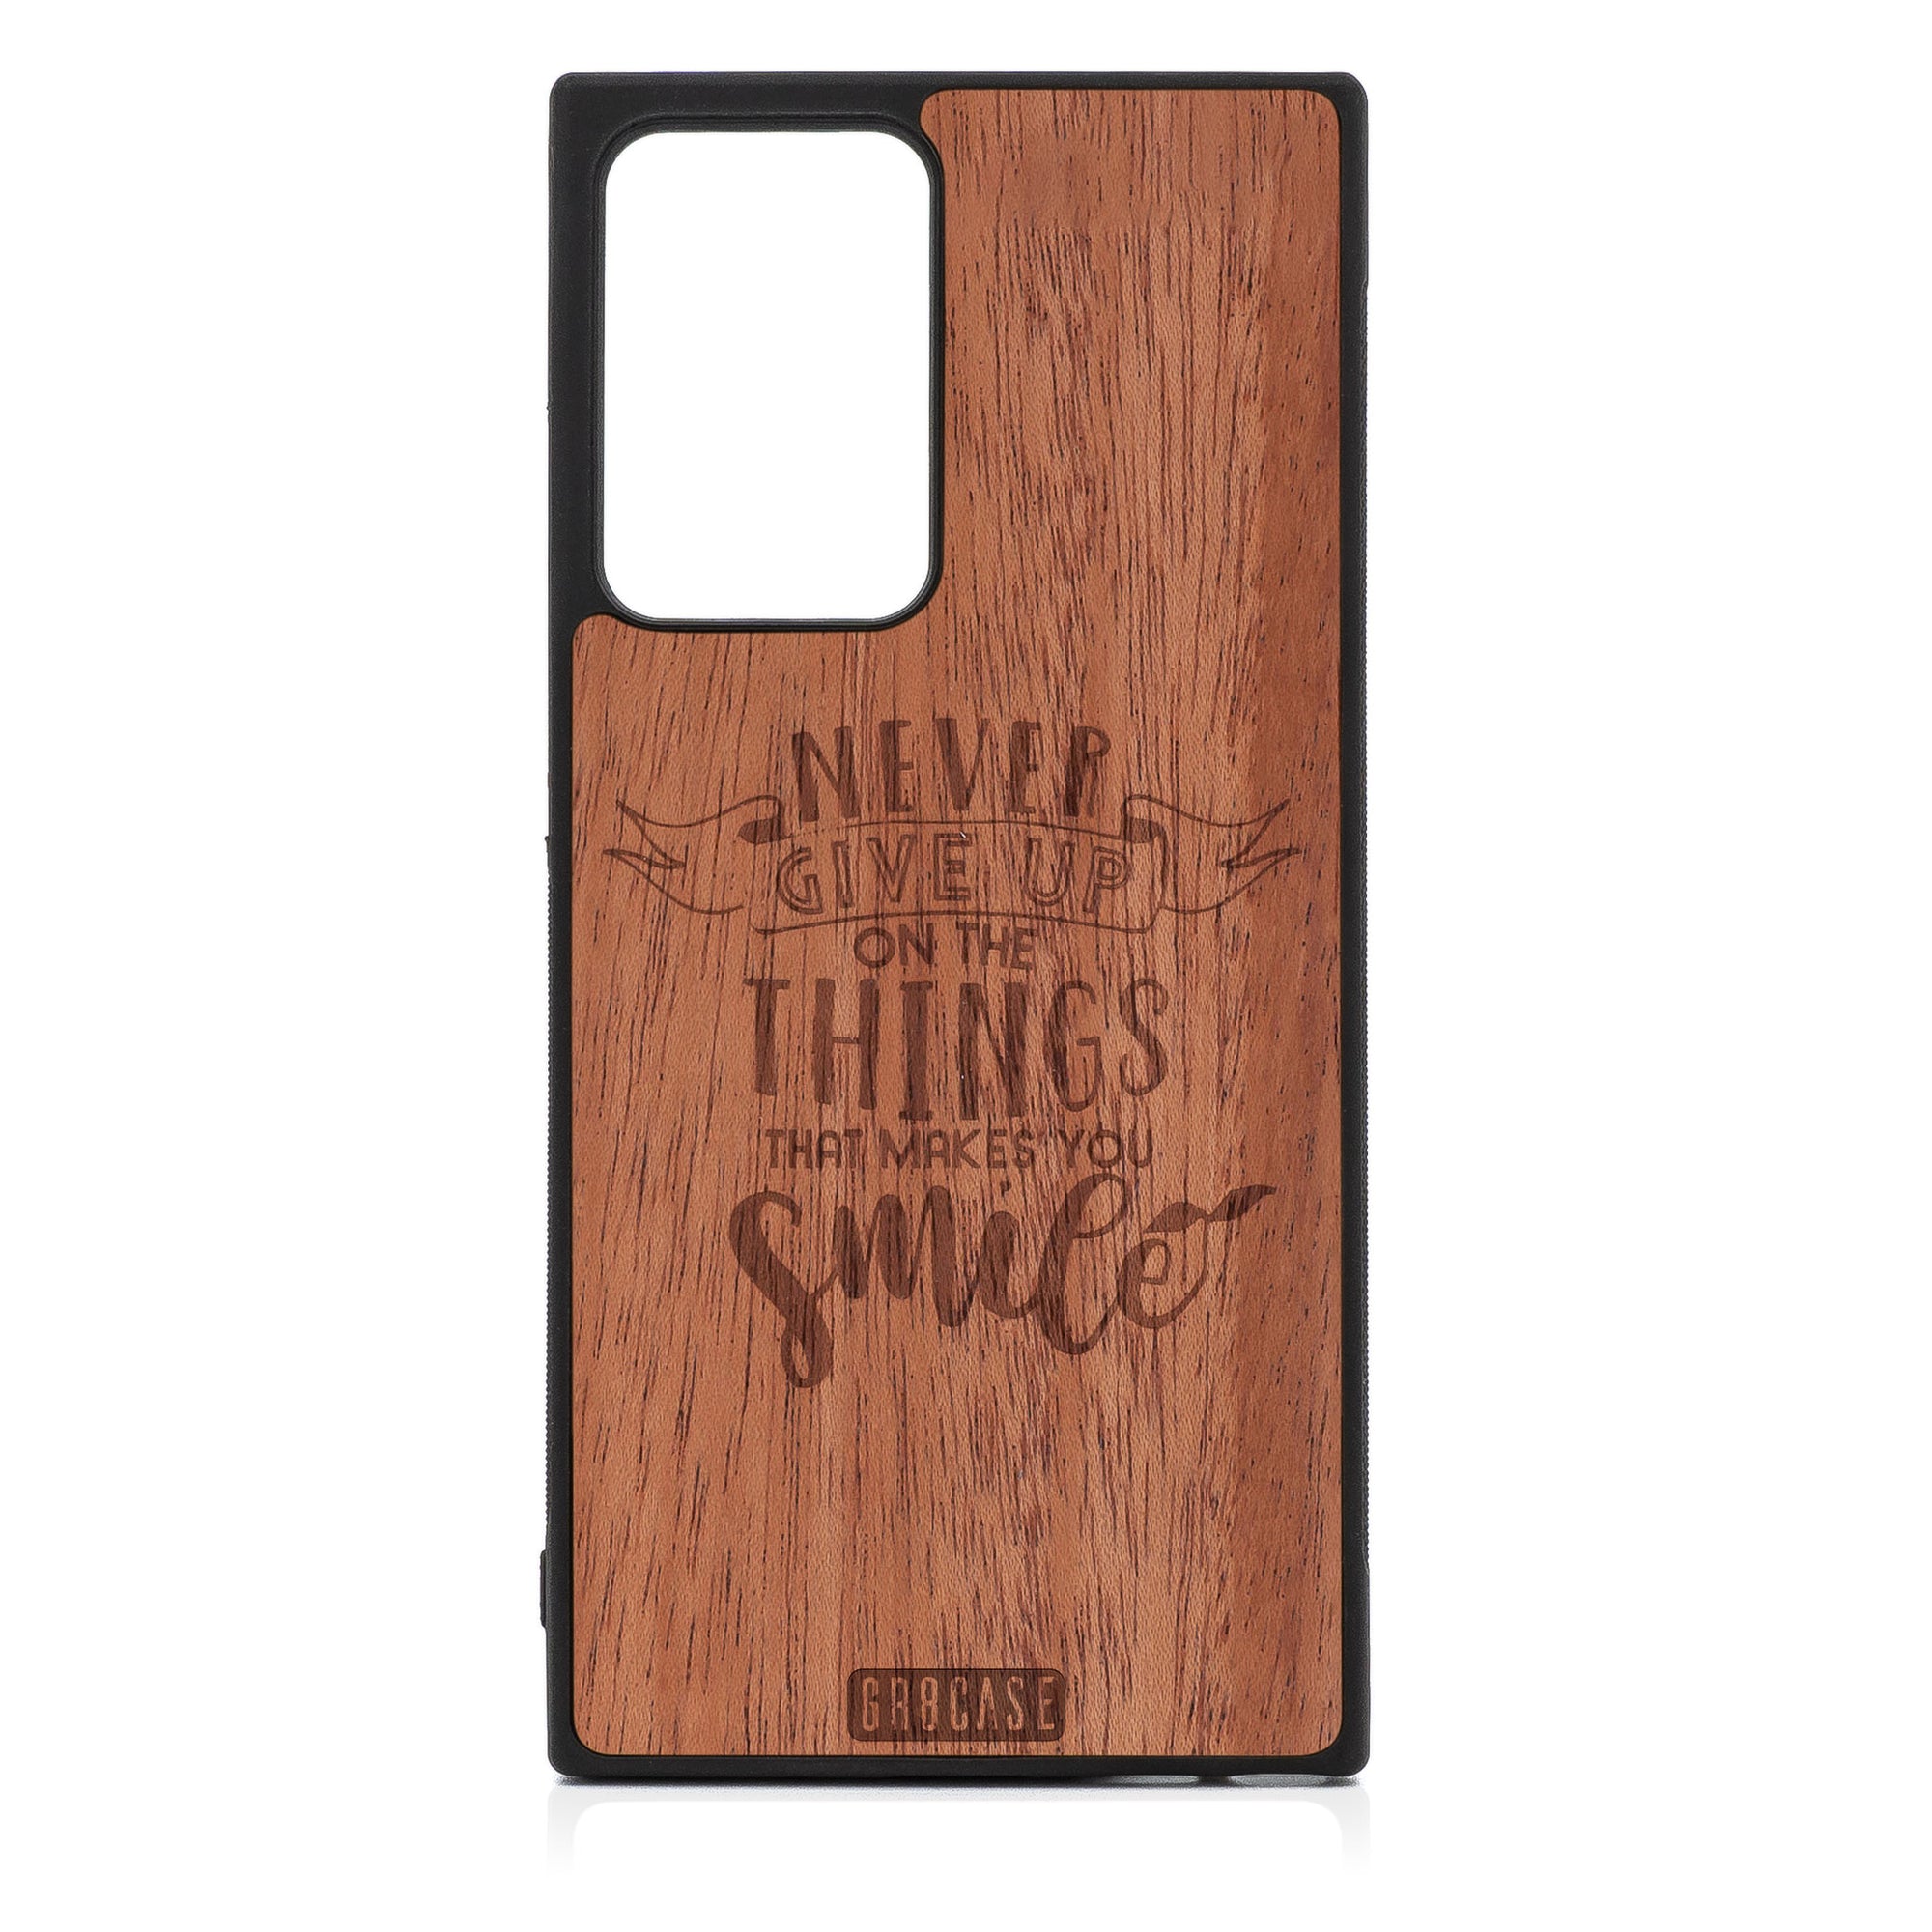 Never Give Up On The Things That Makes You Smile Design Wood Case For Samsung Galaxy Note 20 Ultra